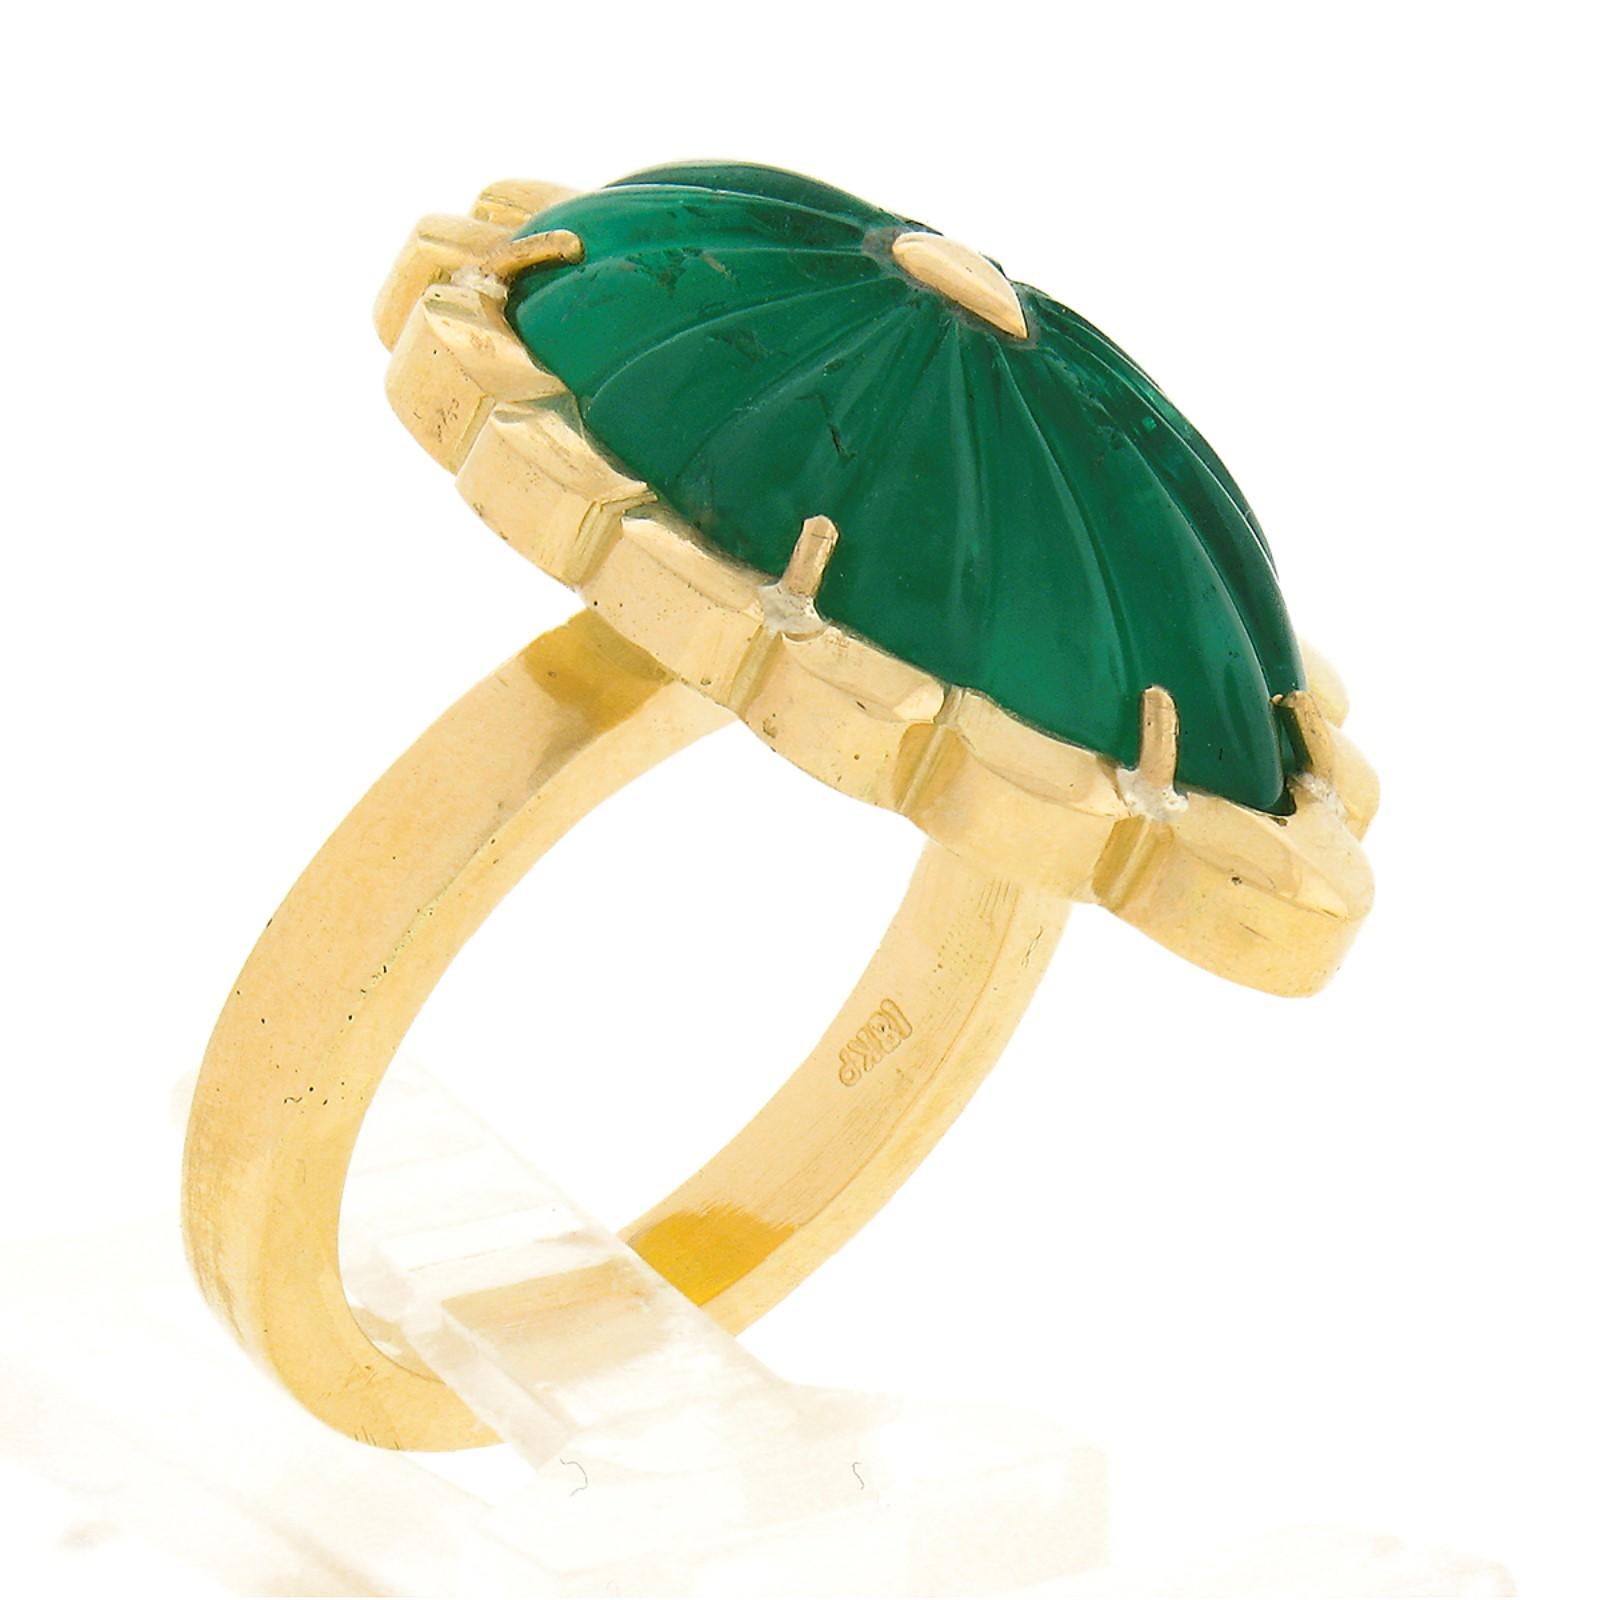 New Handmade 18K Green Gold 9ct GIA Carved Green Emerald Statement Cocktail Ring For Sale 4